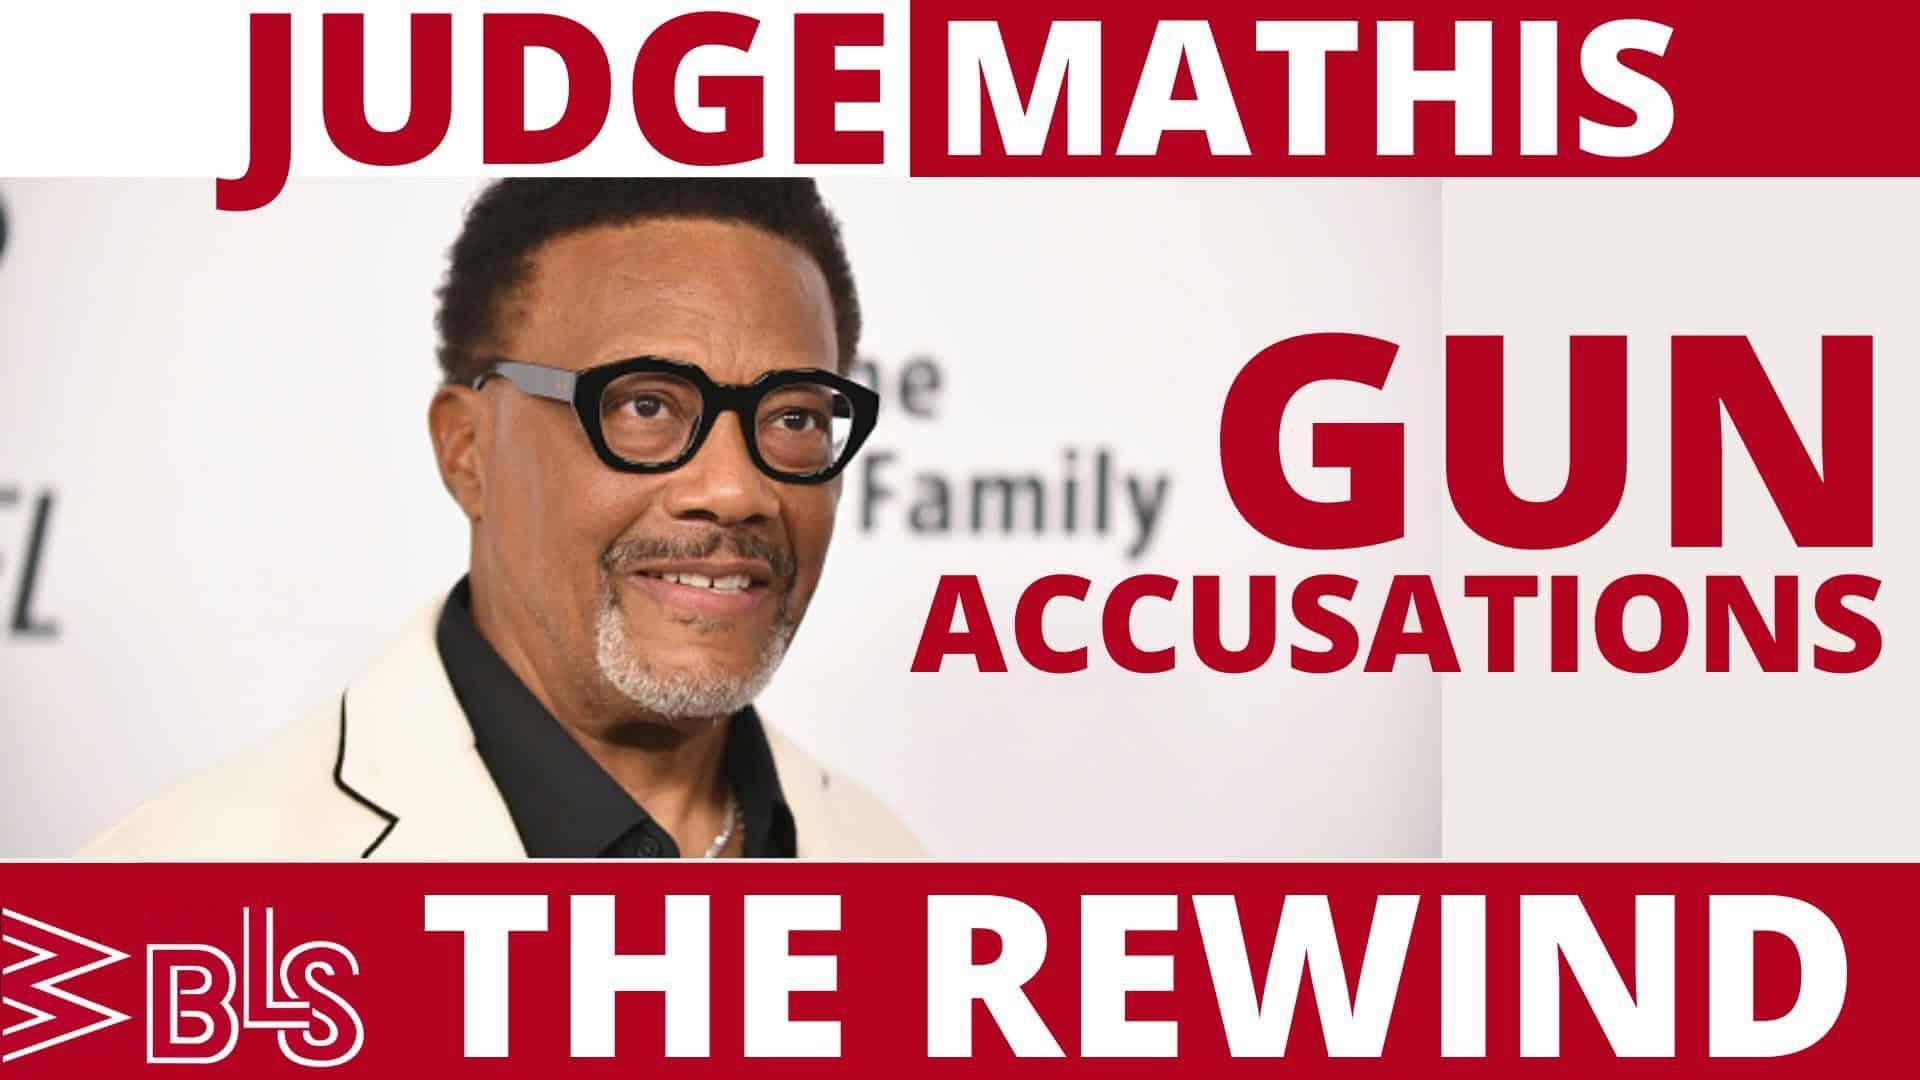 JUDGE MATHIS Pulls Gun On City Workers? BEYONCE's MOM Files For DIVORCE!